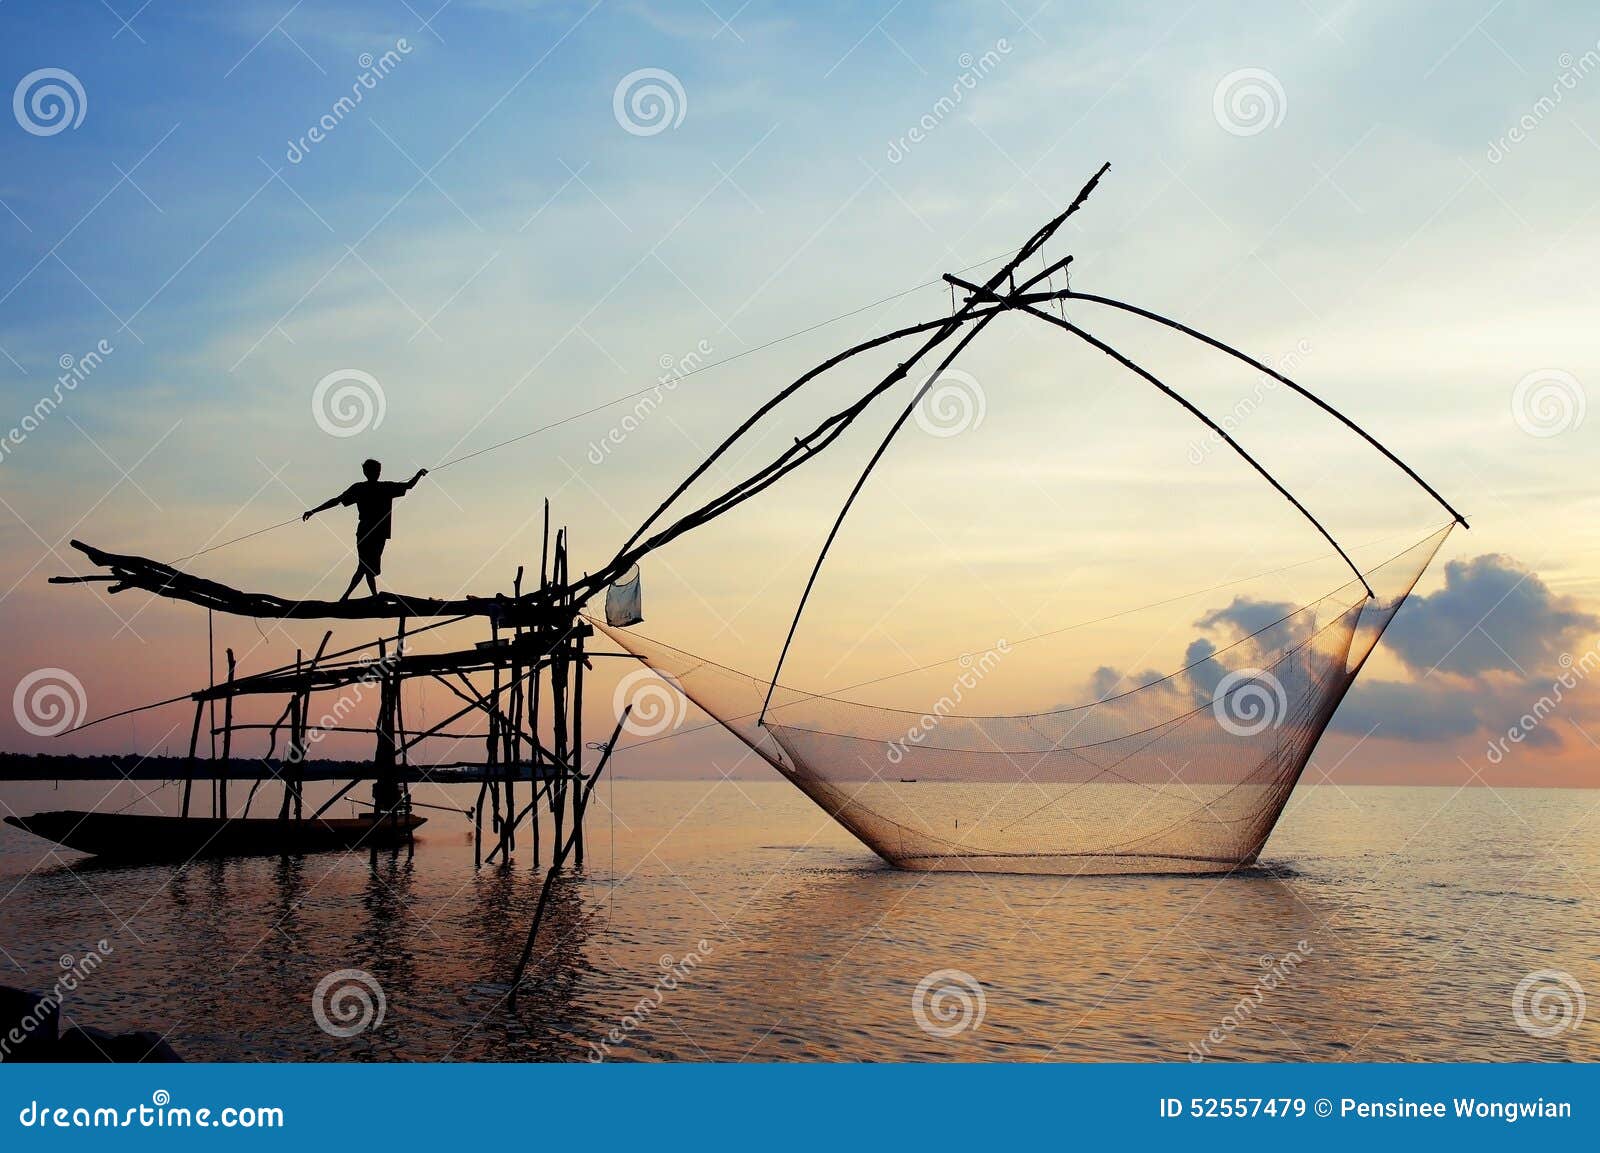 https://thumbs.dreamstime.com/z/fish-lift-net-phatthalung-water-scape-scene-square-dip-patthalung-thailand-traditional-fishing-52557479.jpg